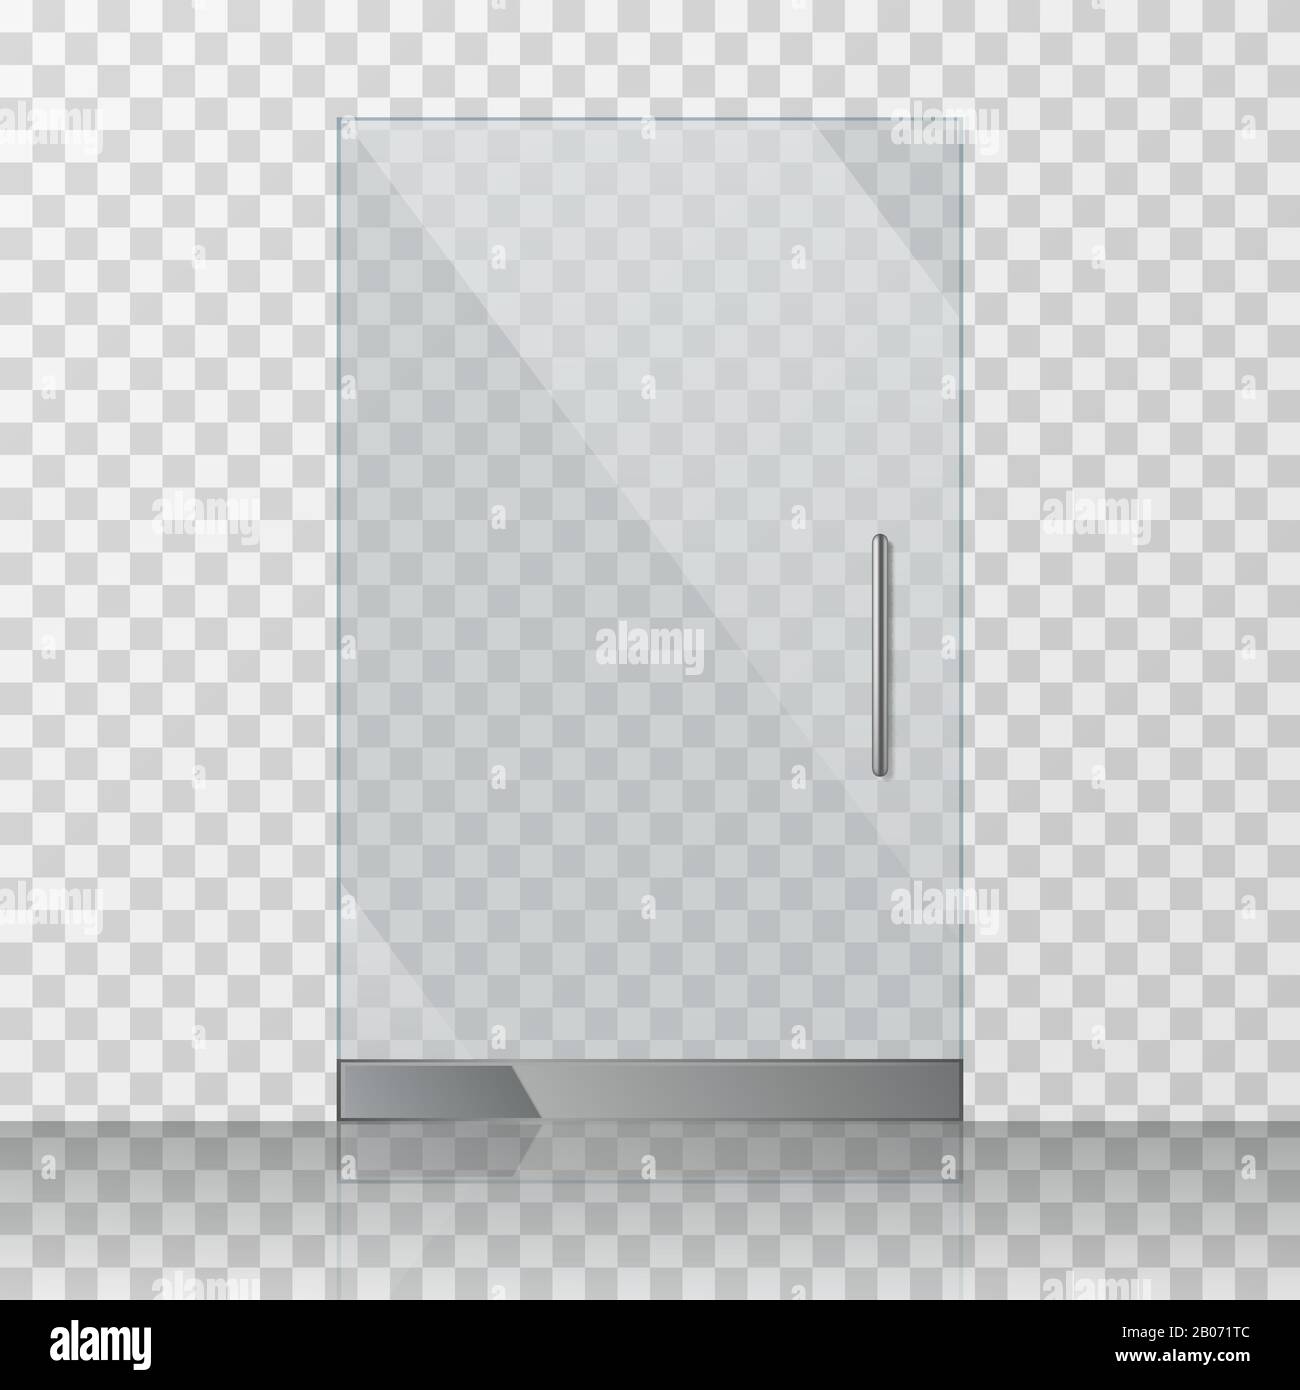 Download Transparent Clear Glass Door Isolated On Transparent Checkered Background Mock Up Entrance Door For Shop Or Fashion Boutique Vector Illustration Stock Vector Image Art Alamy